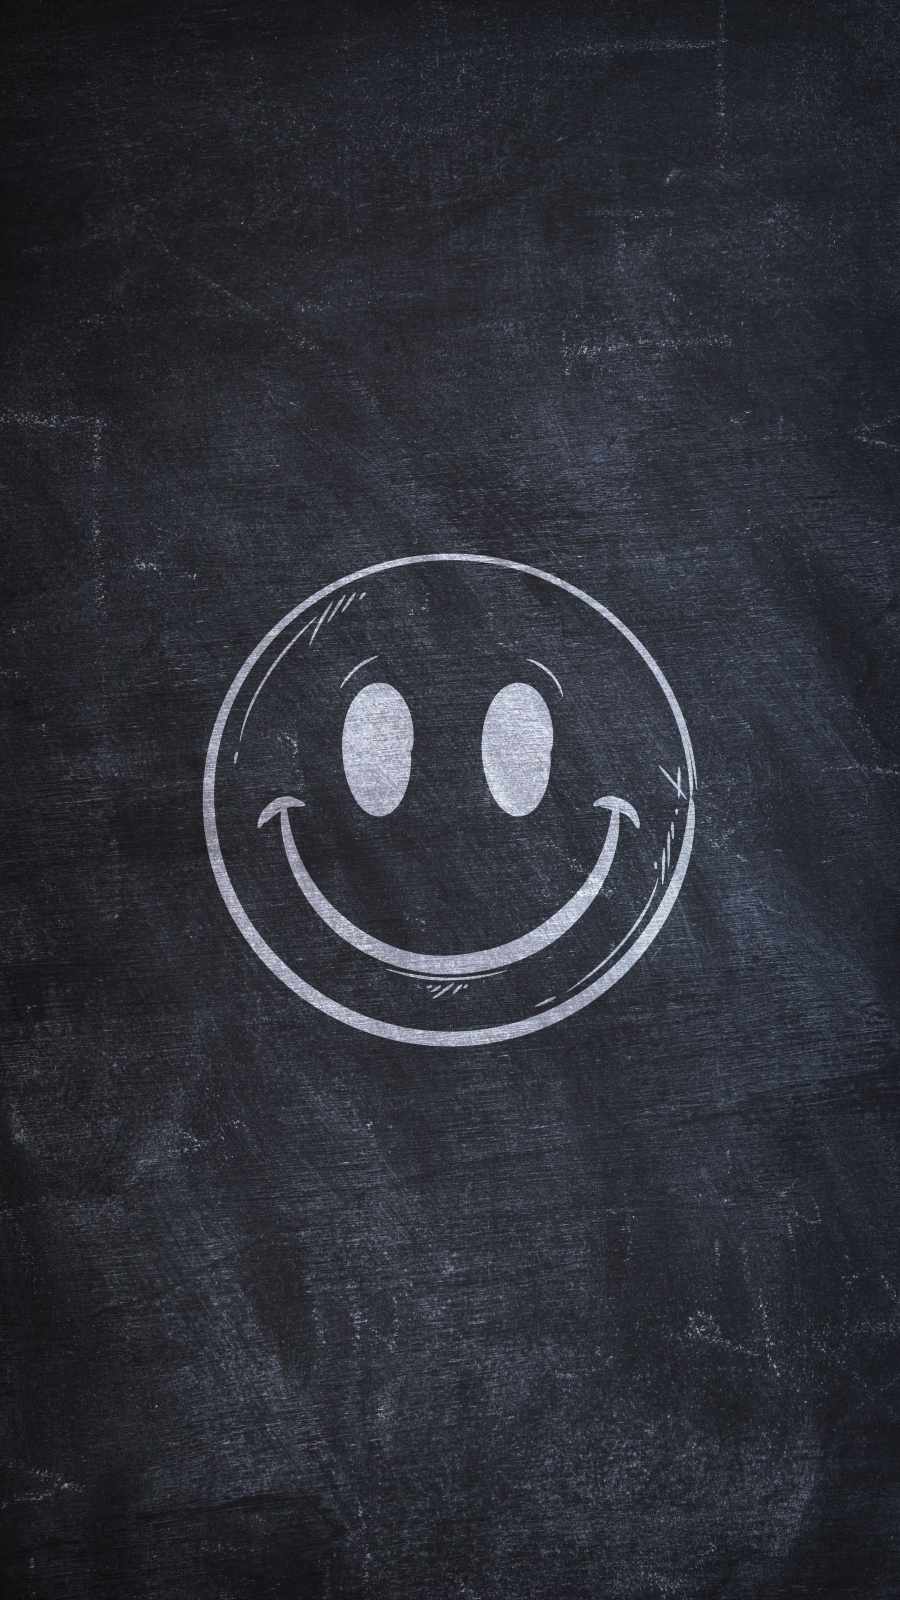 Smiley face HD wallpapers free download | Wallpaperbetter